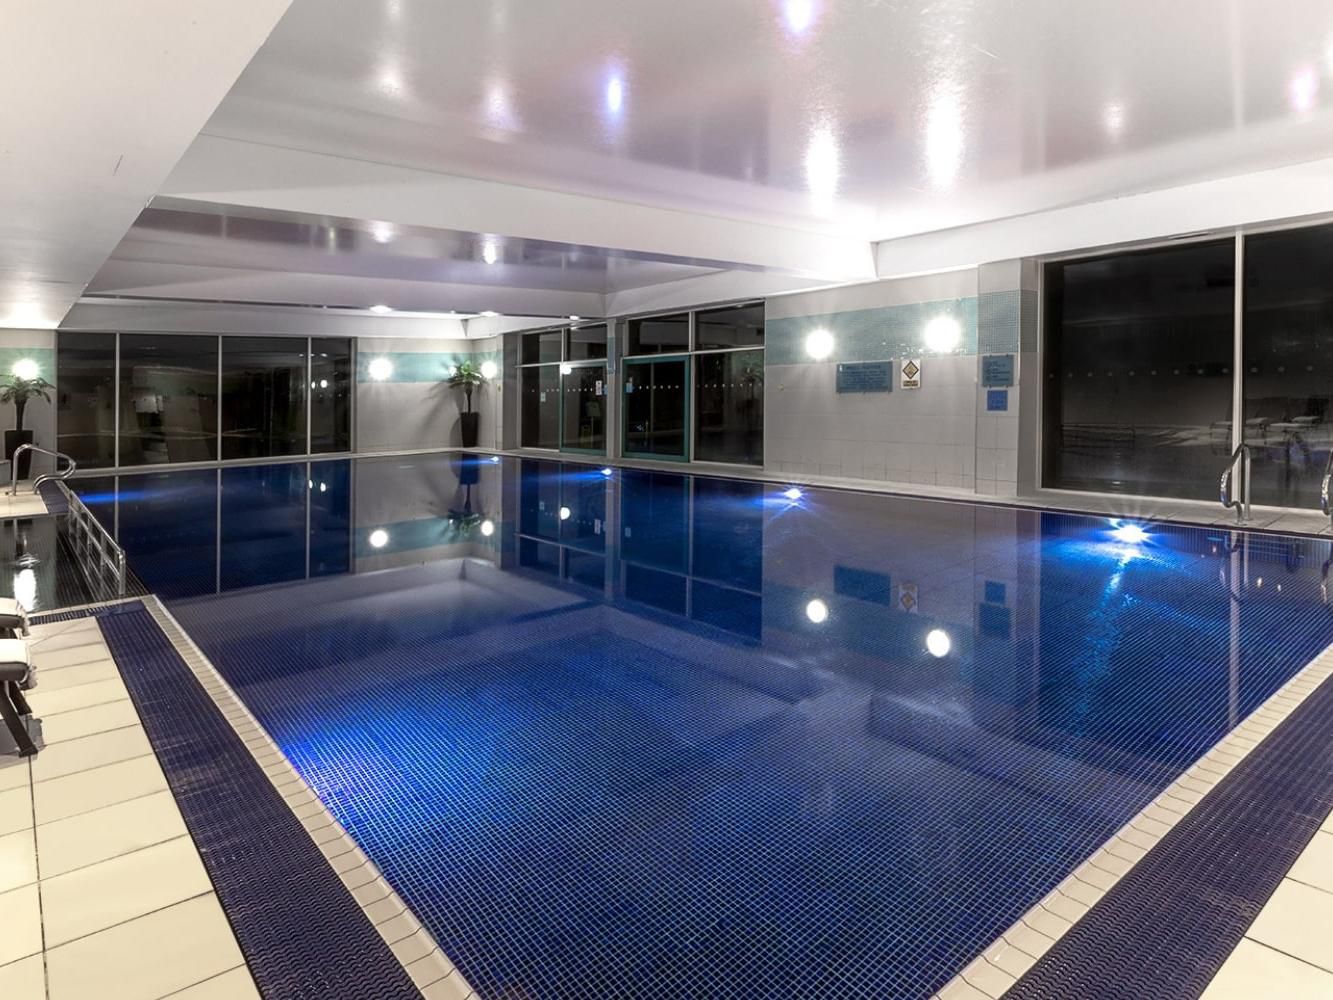 Quad Club is the ideal health & Fitness Centre in which to unwind & relax. With its deep-blue 18m mosaic-tiled indoor swimming pool, indoor hot tub, sauna & steam room, aerobics studio, Life Fitness gym. The club offers 4 x beauty treatment rooms.